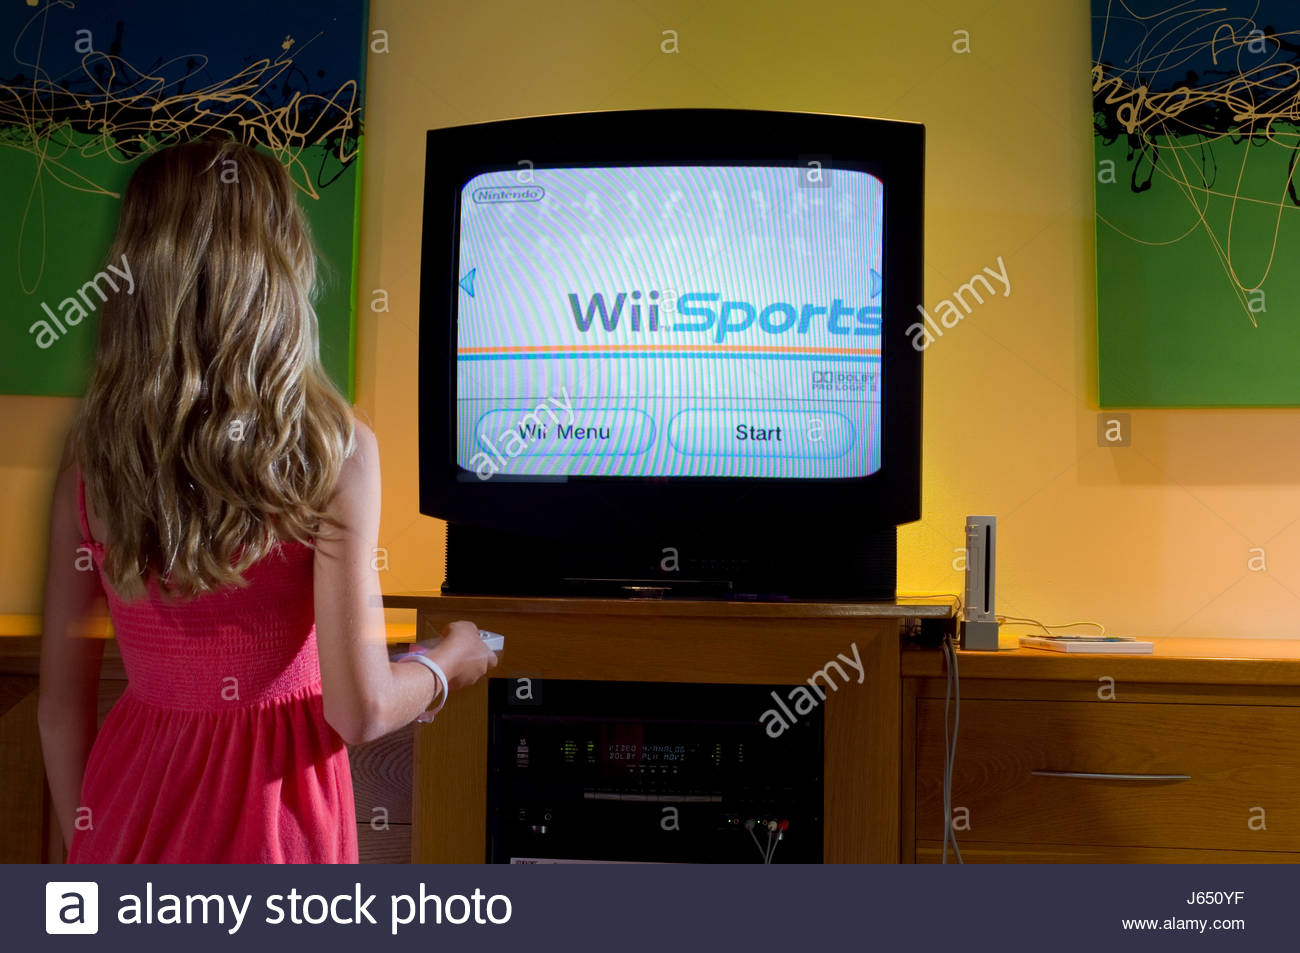 wii console with wii sports